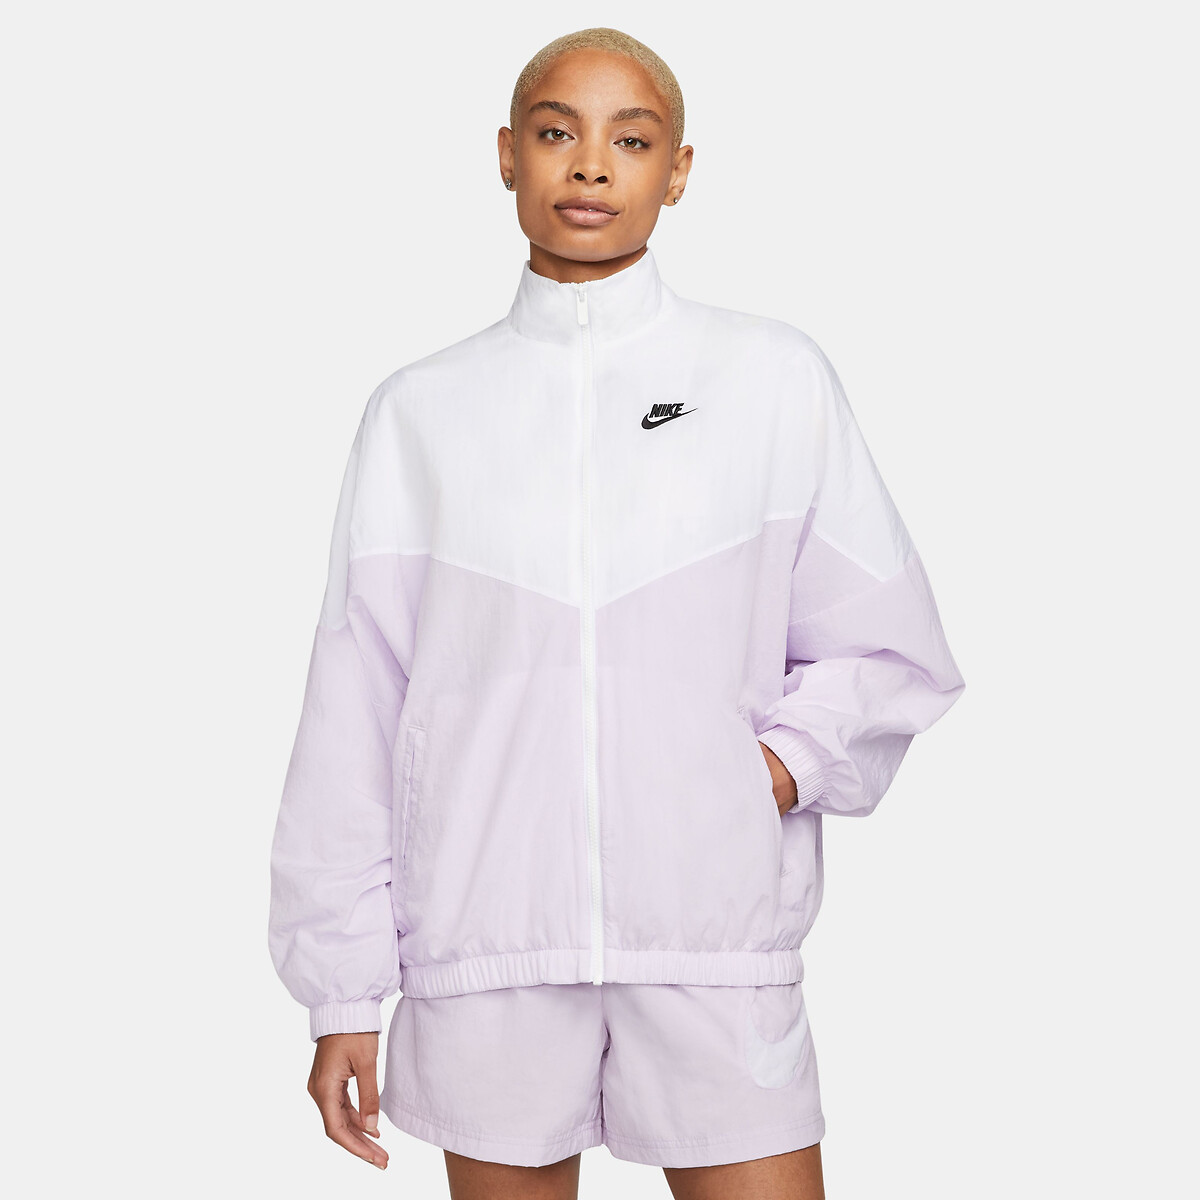 windrunner jacket with embroidered logo, white/pink, Nike | La Redoute